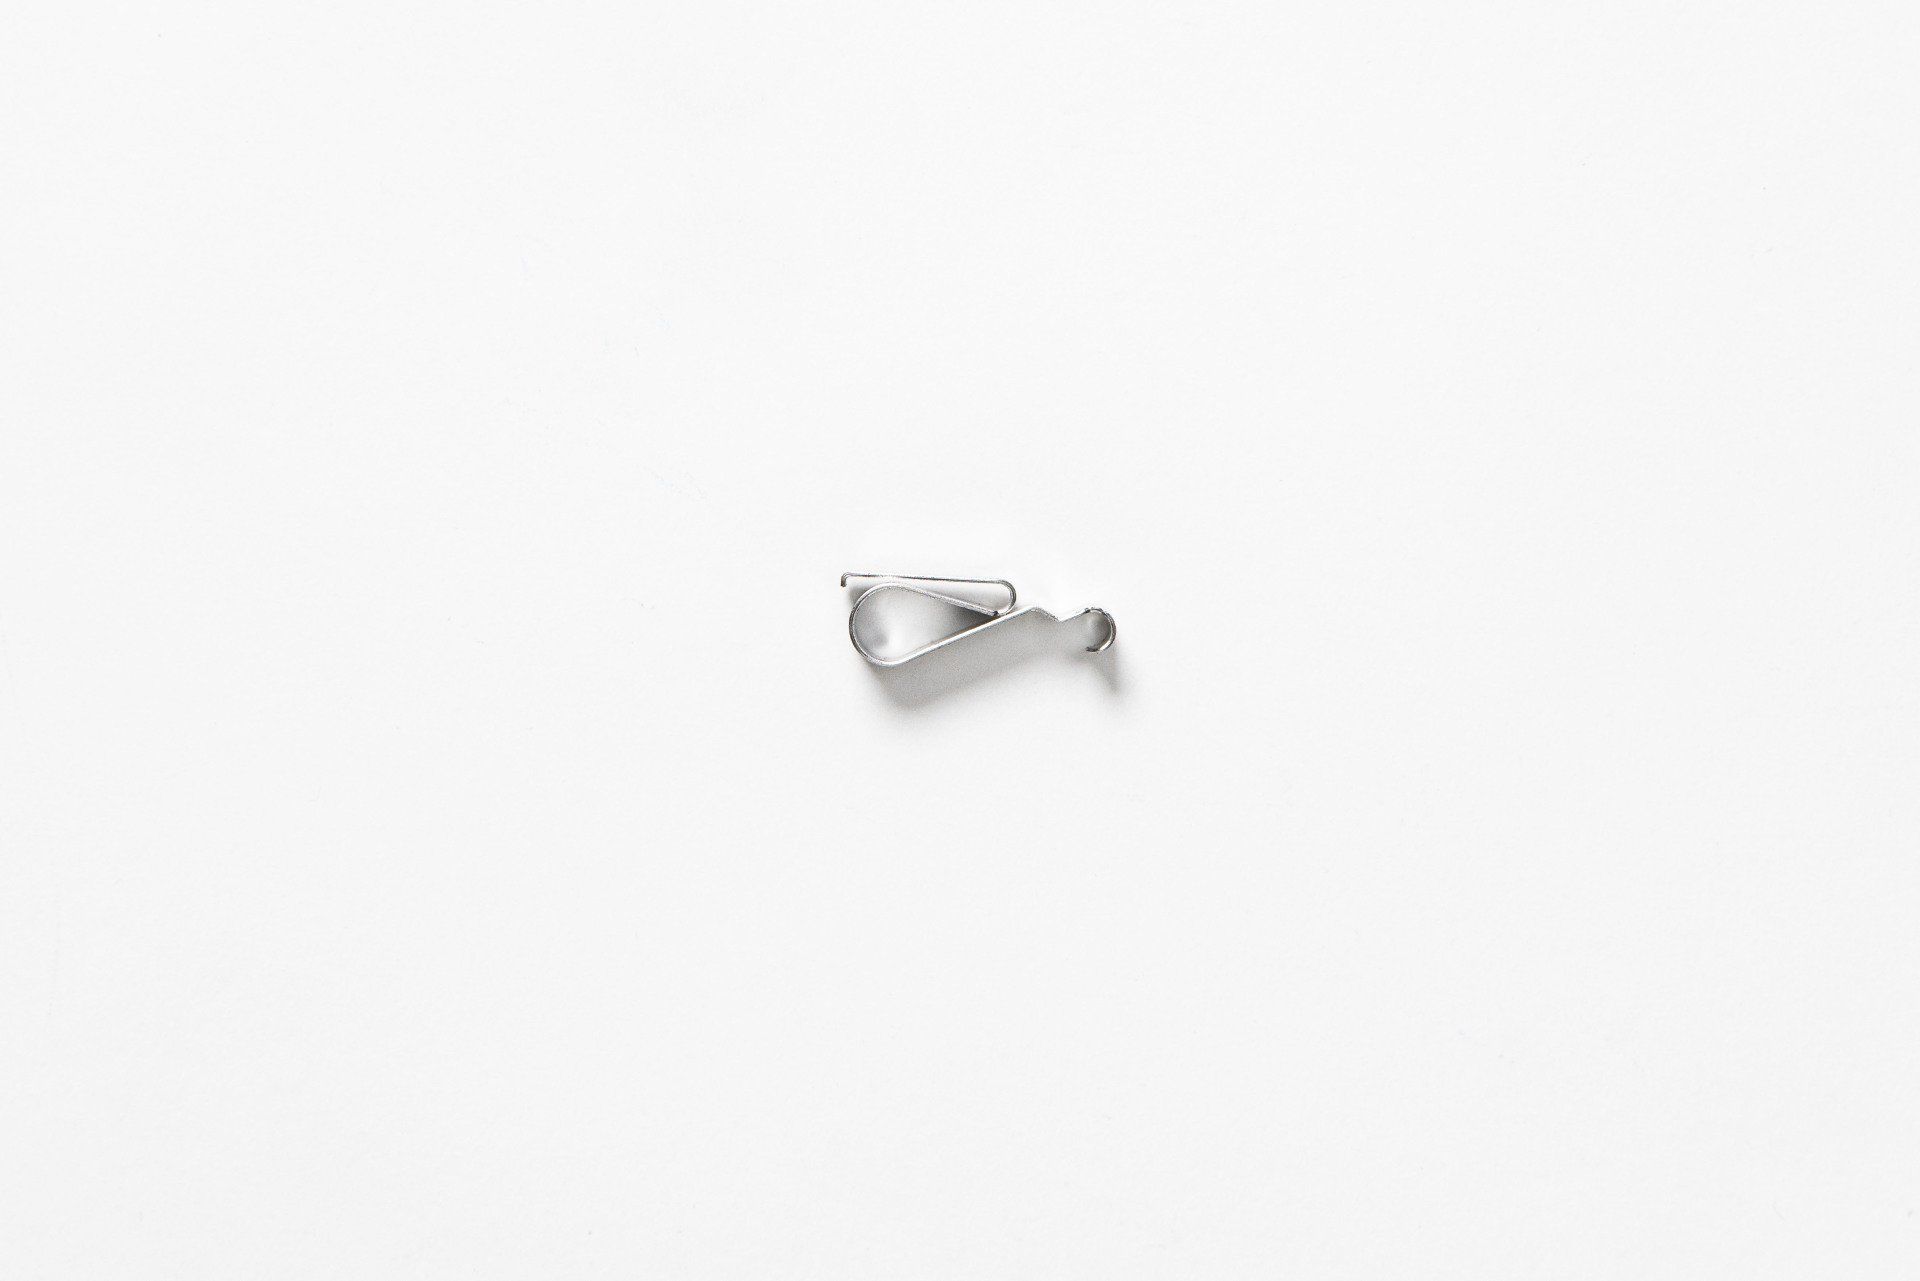 A small silver pendant is sitting on a white surface.